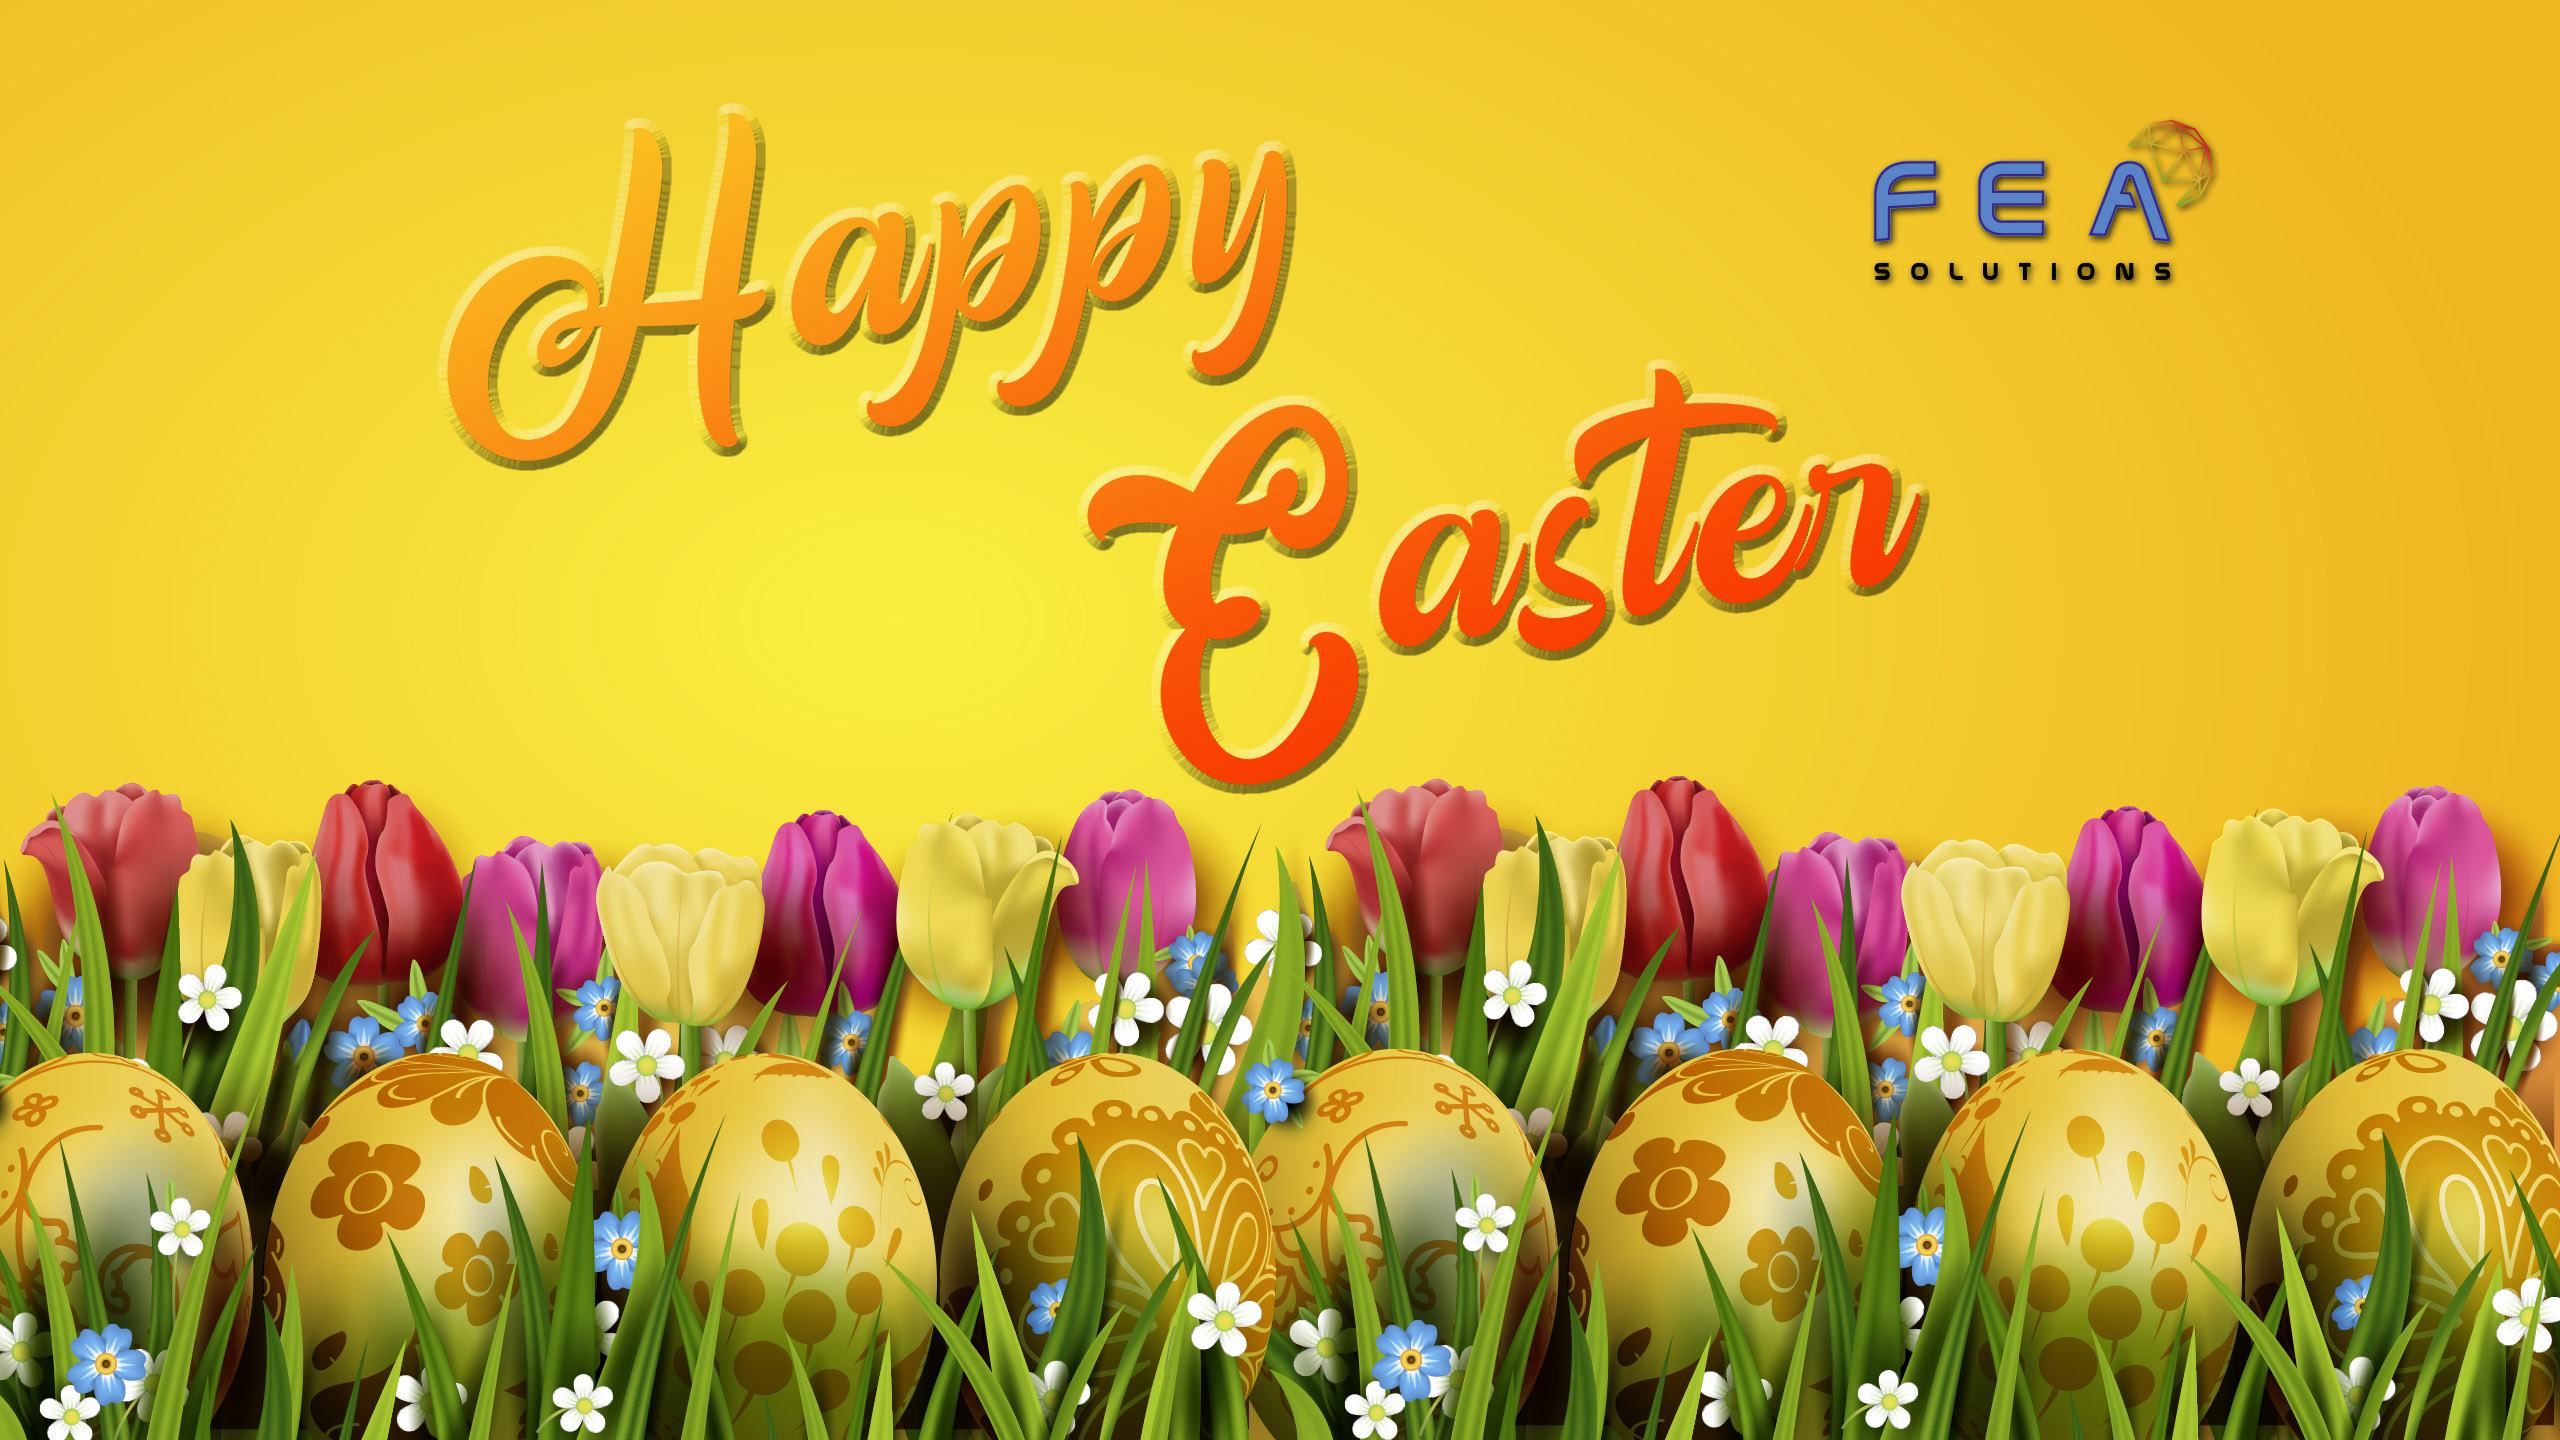 happy easter message from fea solutions